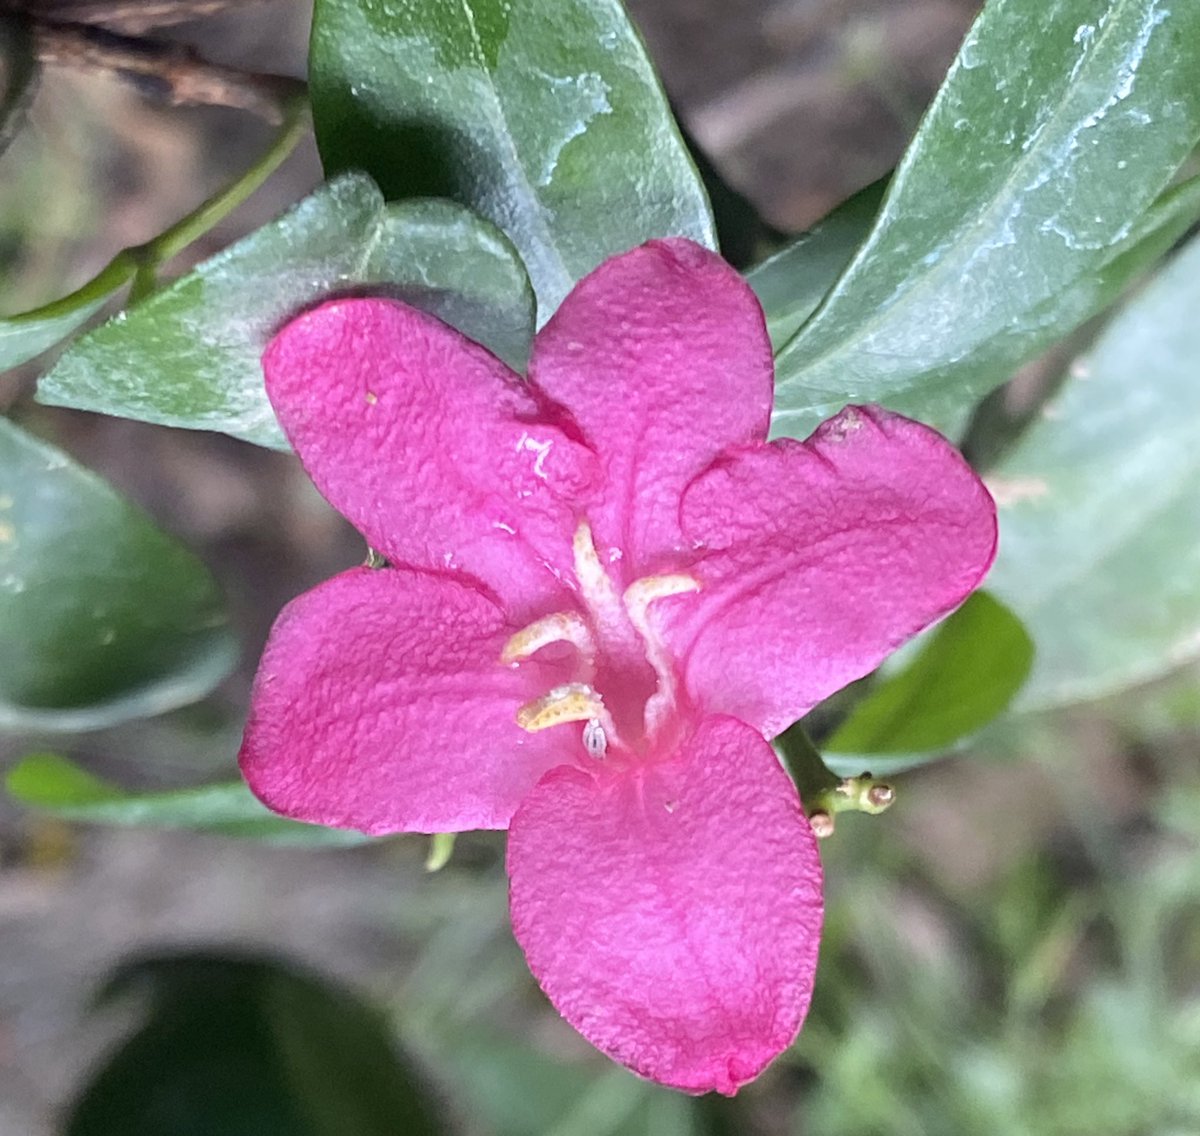 Pink Limonia , #RaveniaSpectabilis is flowering .Have you seen it in  your area ? Do share if you see it .Its season will peak with the arrival of Monsoon. #PinkLimonia 
is great butterfly attractor.

#StoriesOfTreesOfDelhi #Flowers #Pink #Limonia #Happiness #Mentalhealth